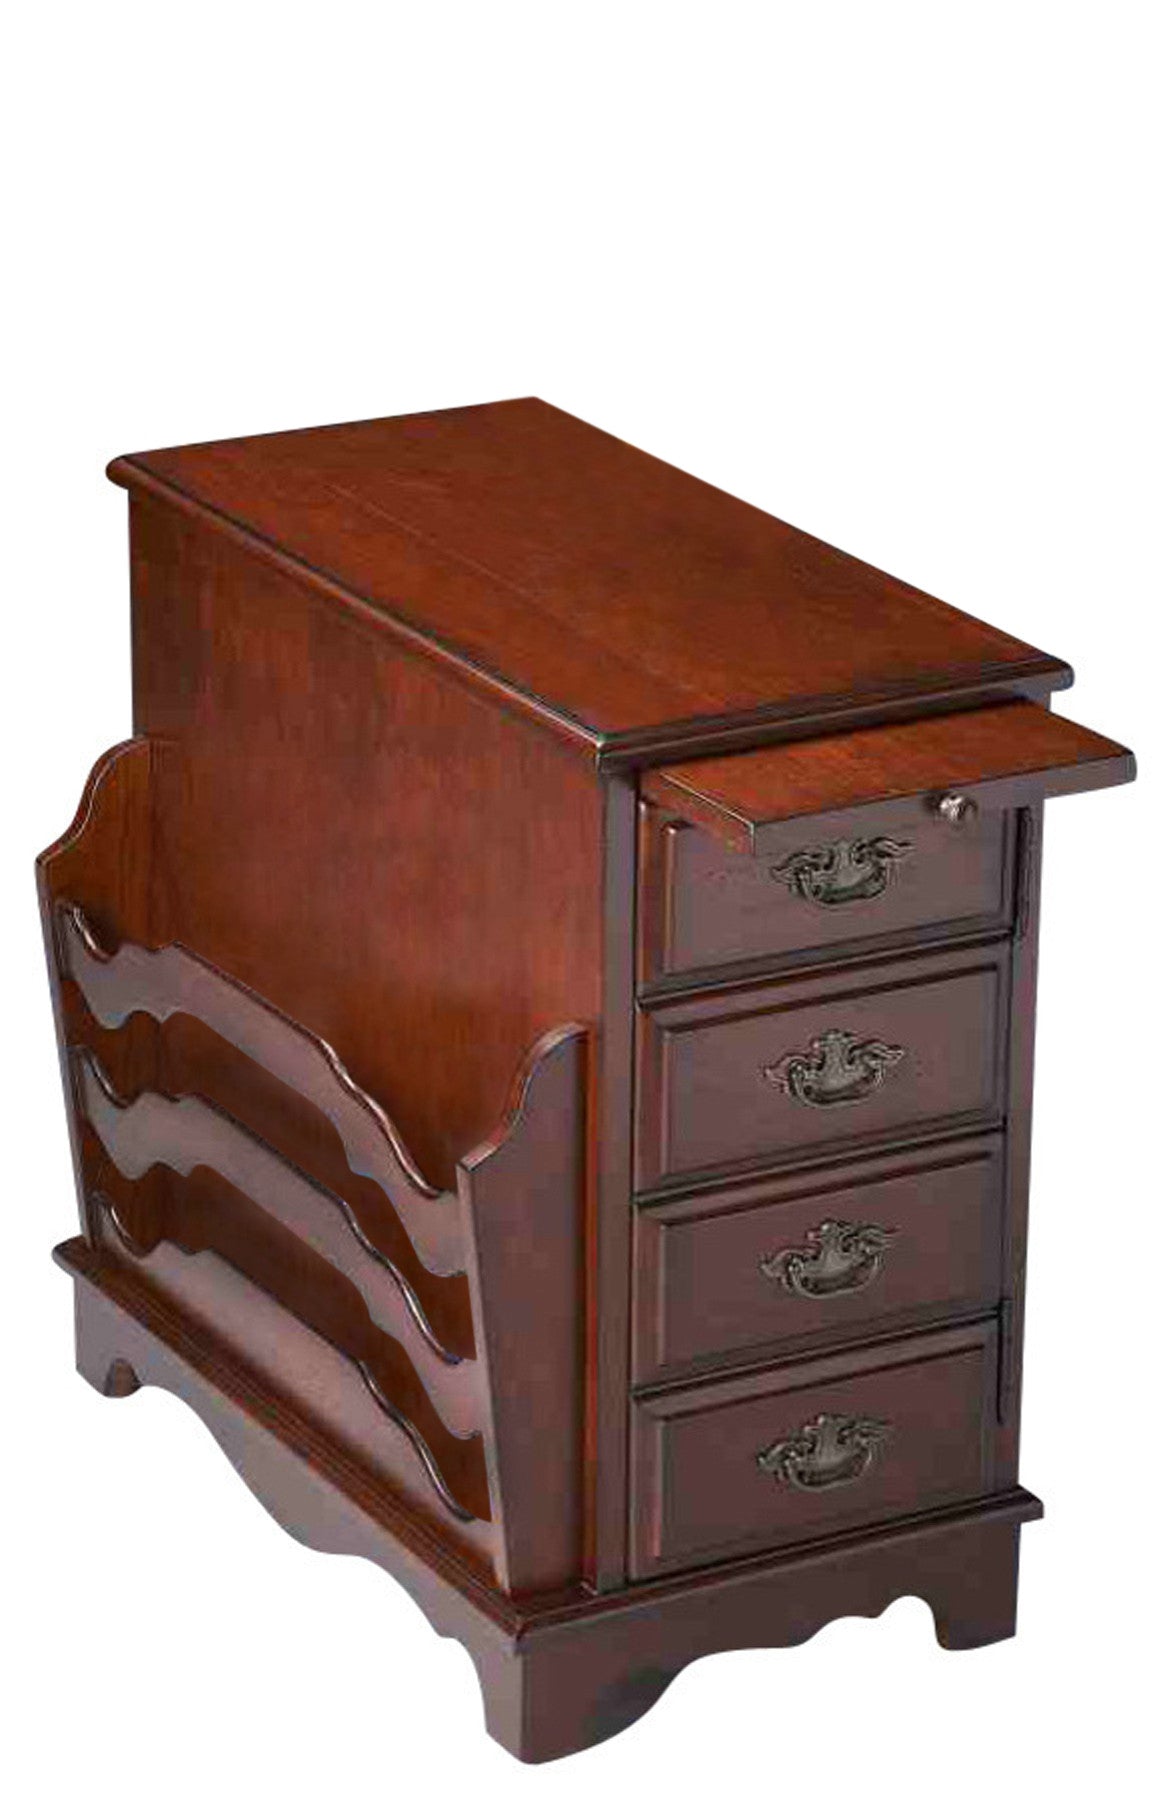 24" Dark Brown Manufactured Wood Rectangular End Table With Four Drawers